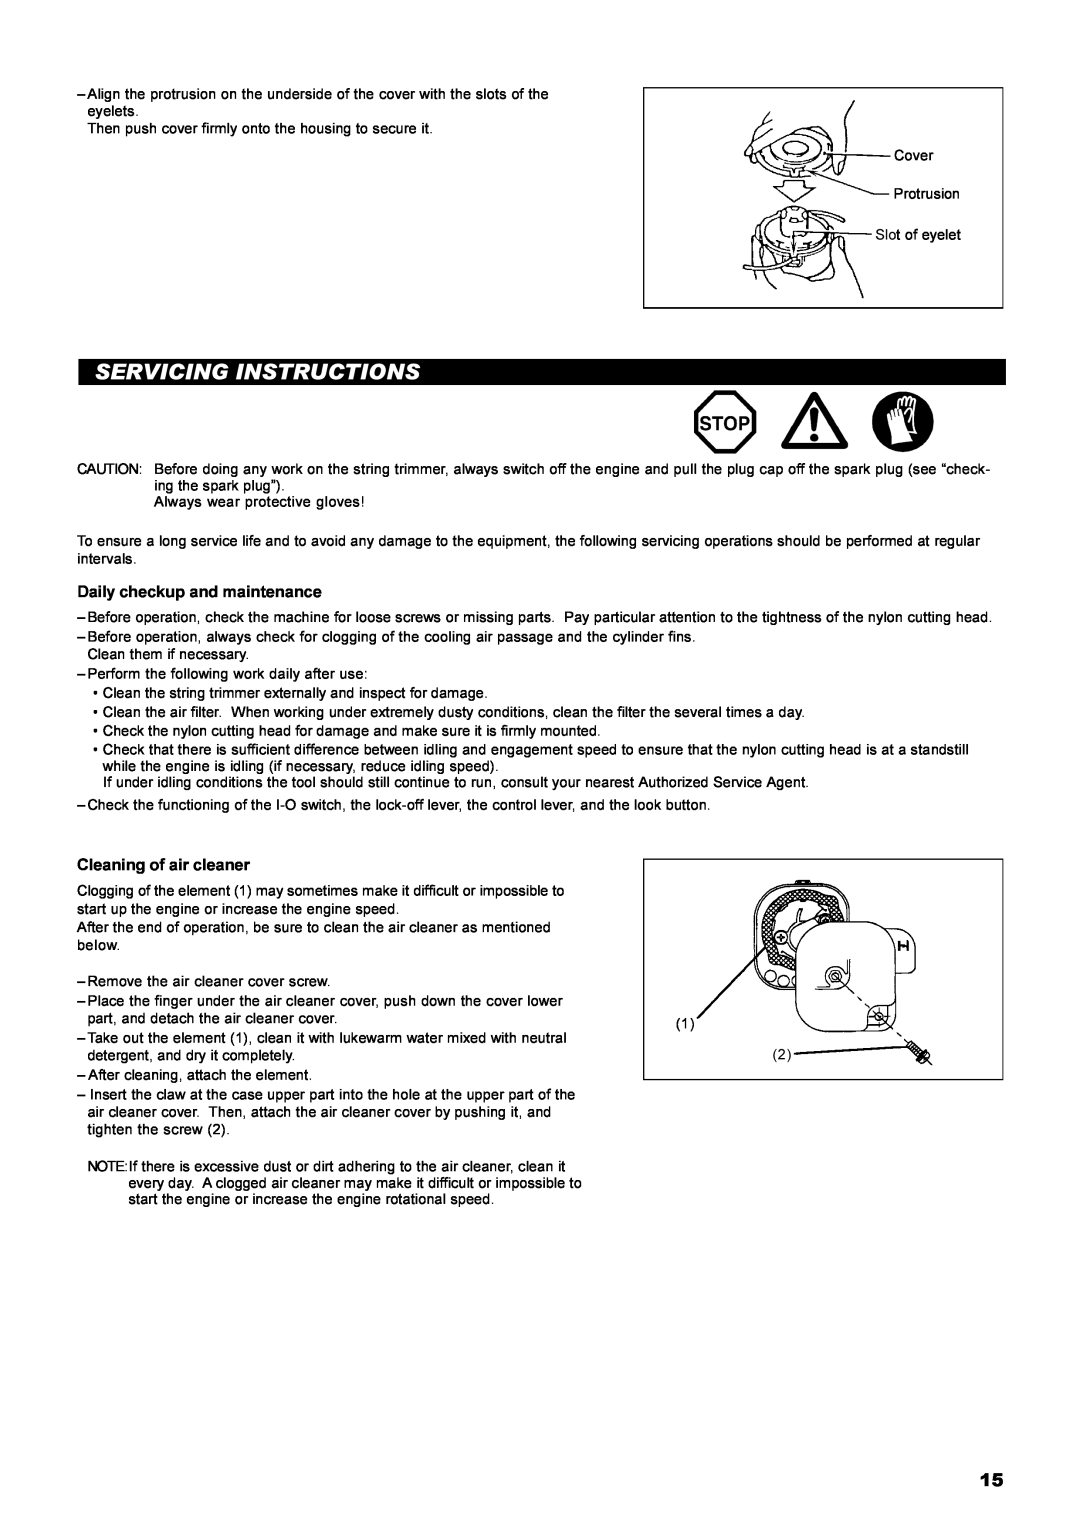 Dolmar MS-22C instruction manual Servicing Instructions, Daily checkup and maintenance, Cleaning of air cleaner 